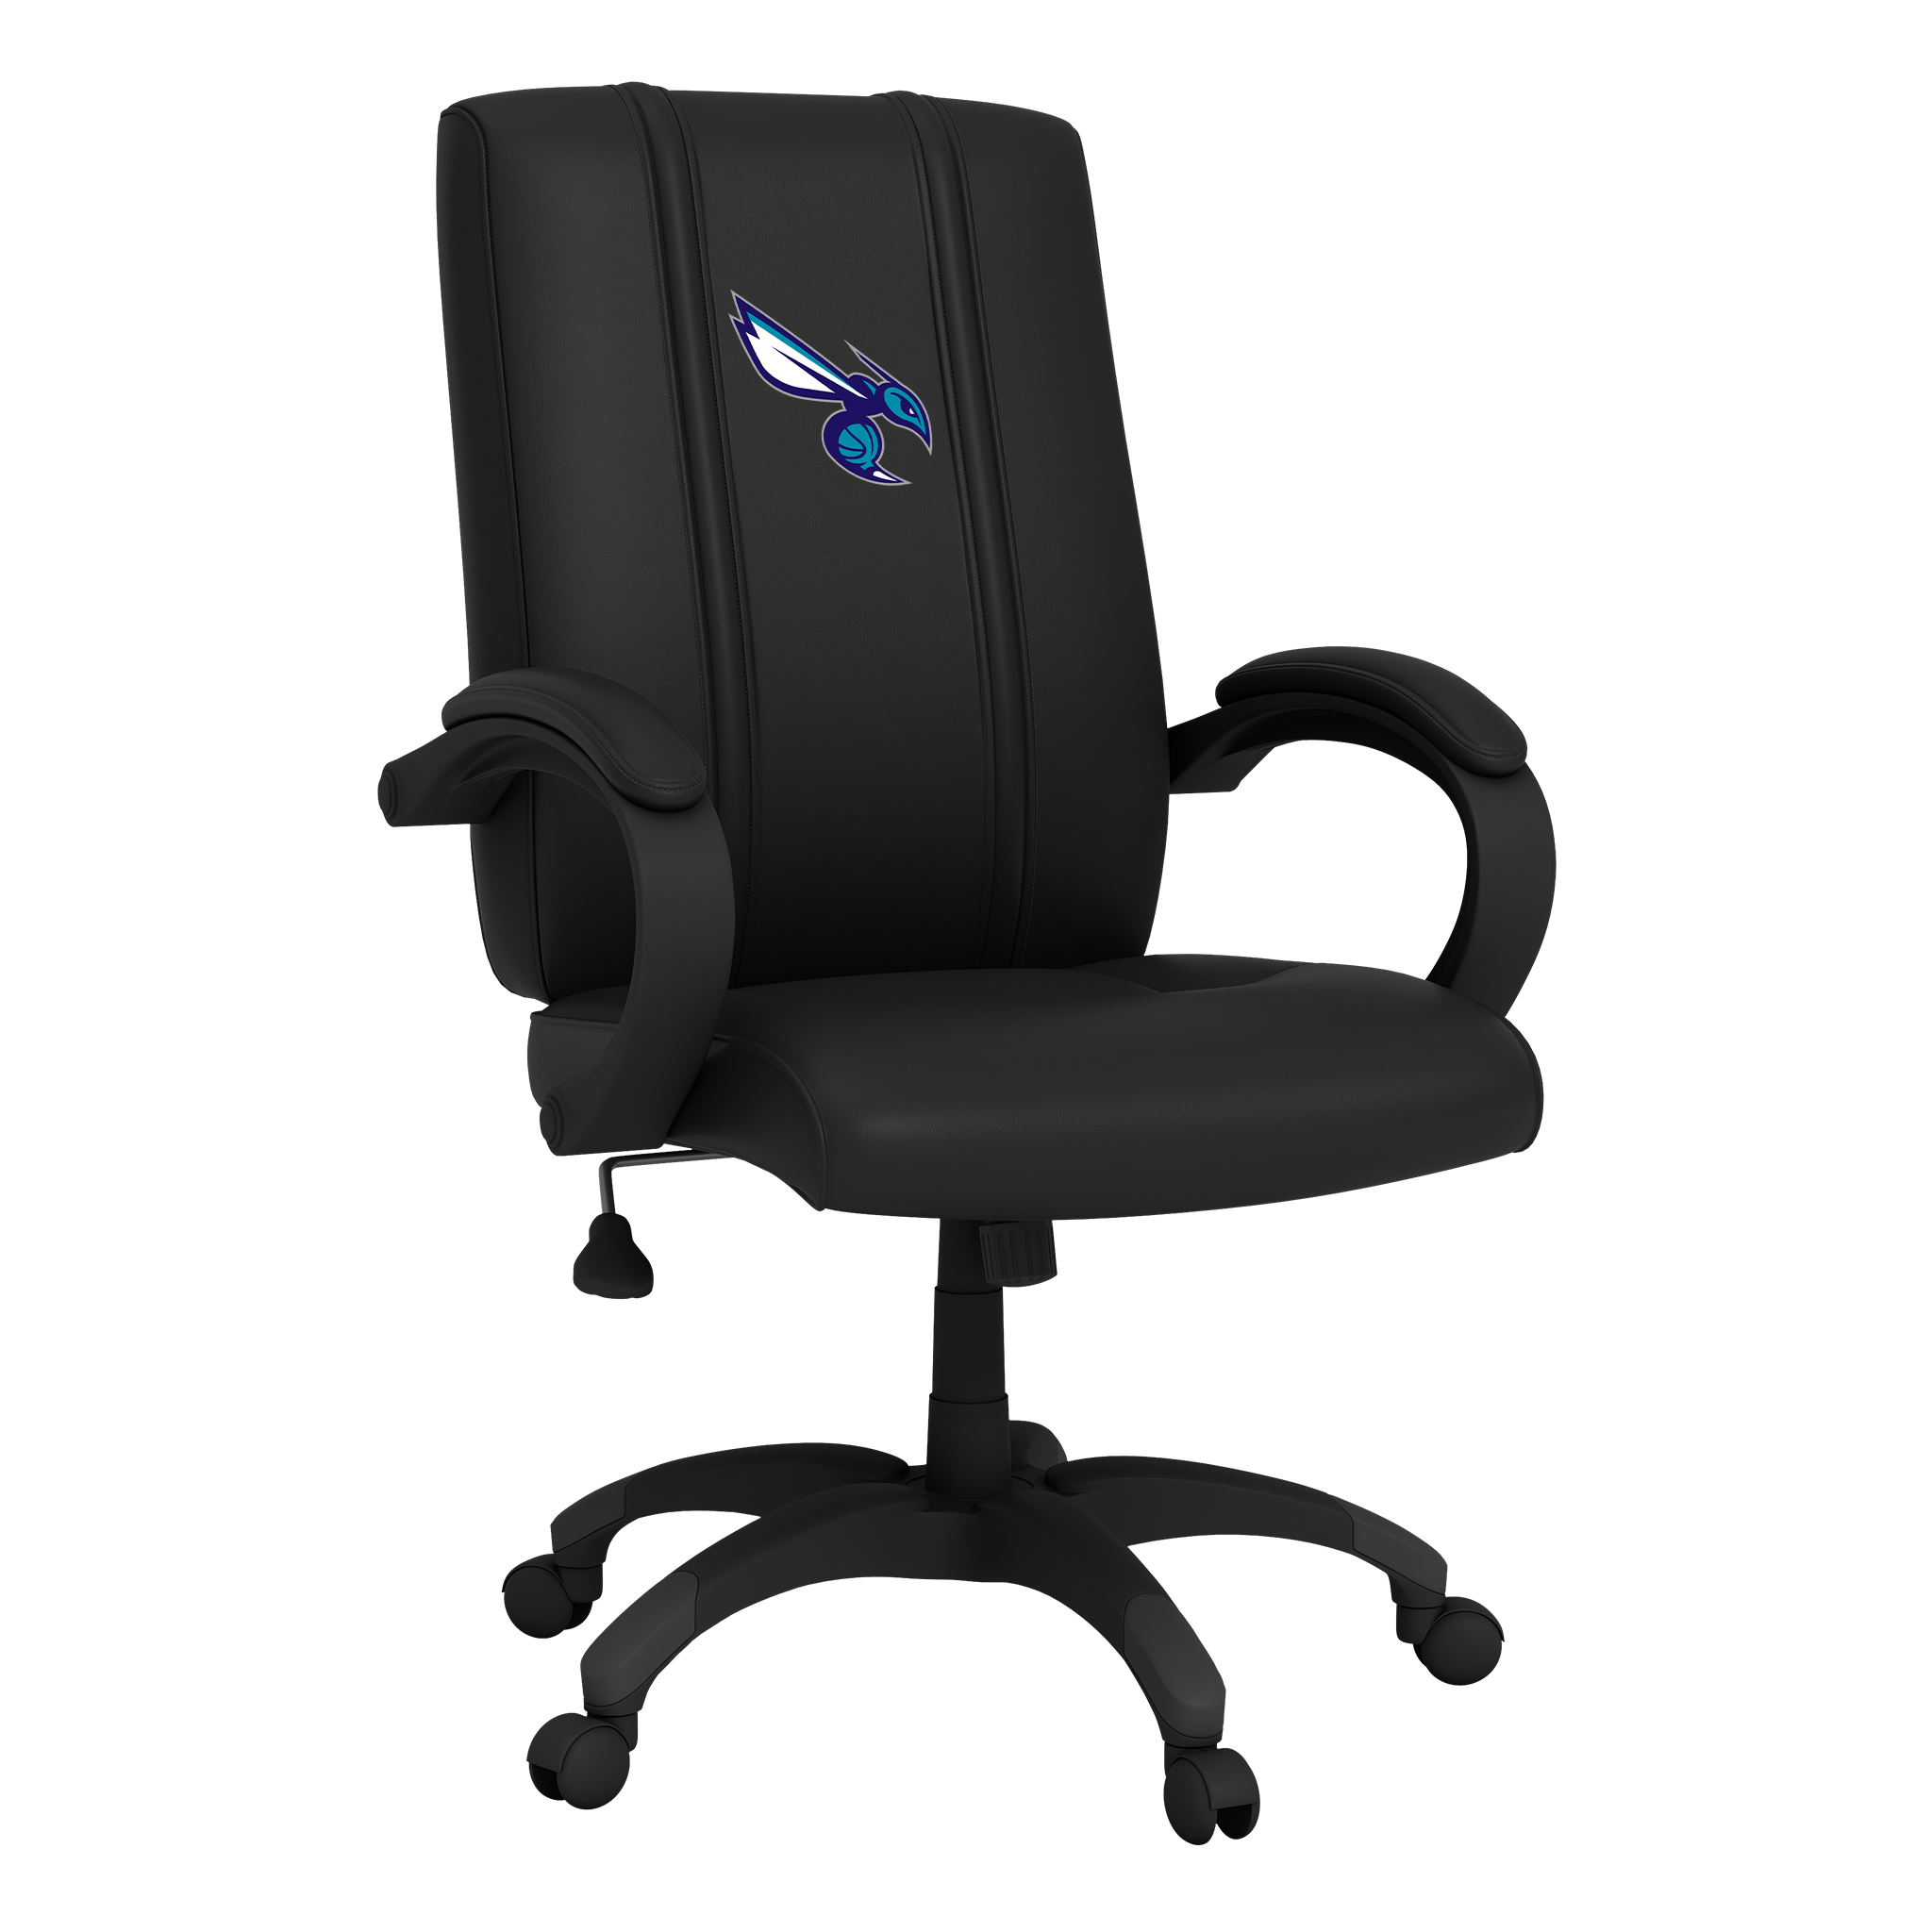 Charlotte Hornets Office Chair 1000 with Charlotte Hornets Secondary